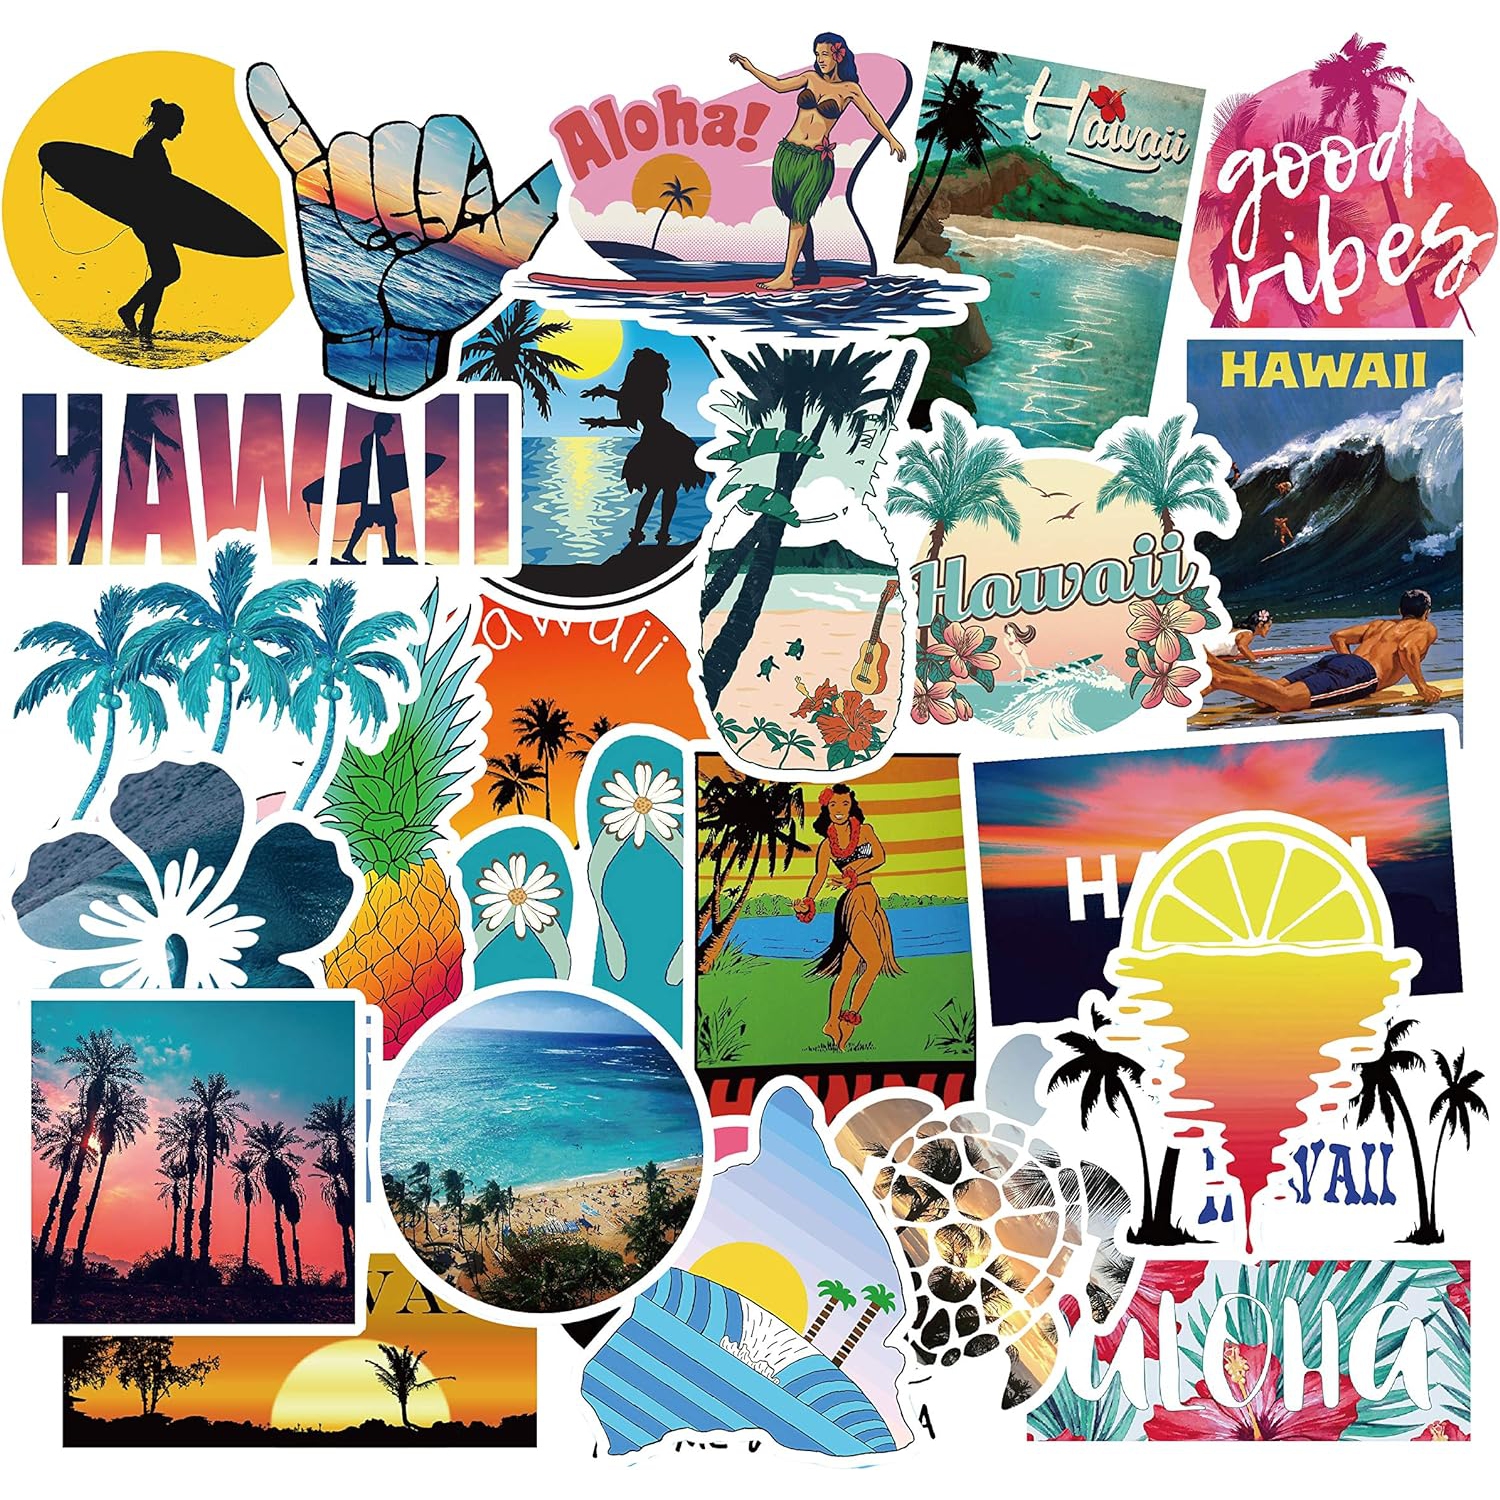 Vinyl Hawaii Stickers Pack 50 Pcs Surfing Decals for Laptop Ipad Car Suitcase Luggage Water Bottle Helmet